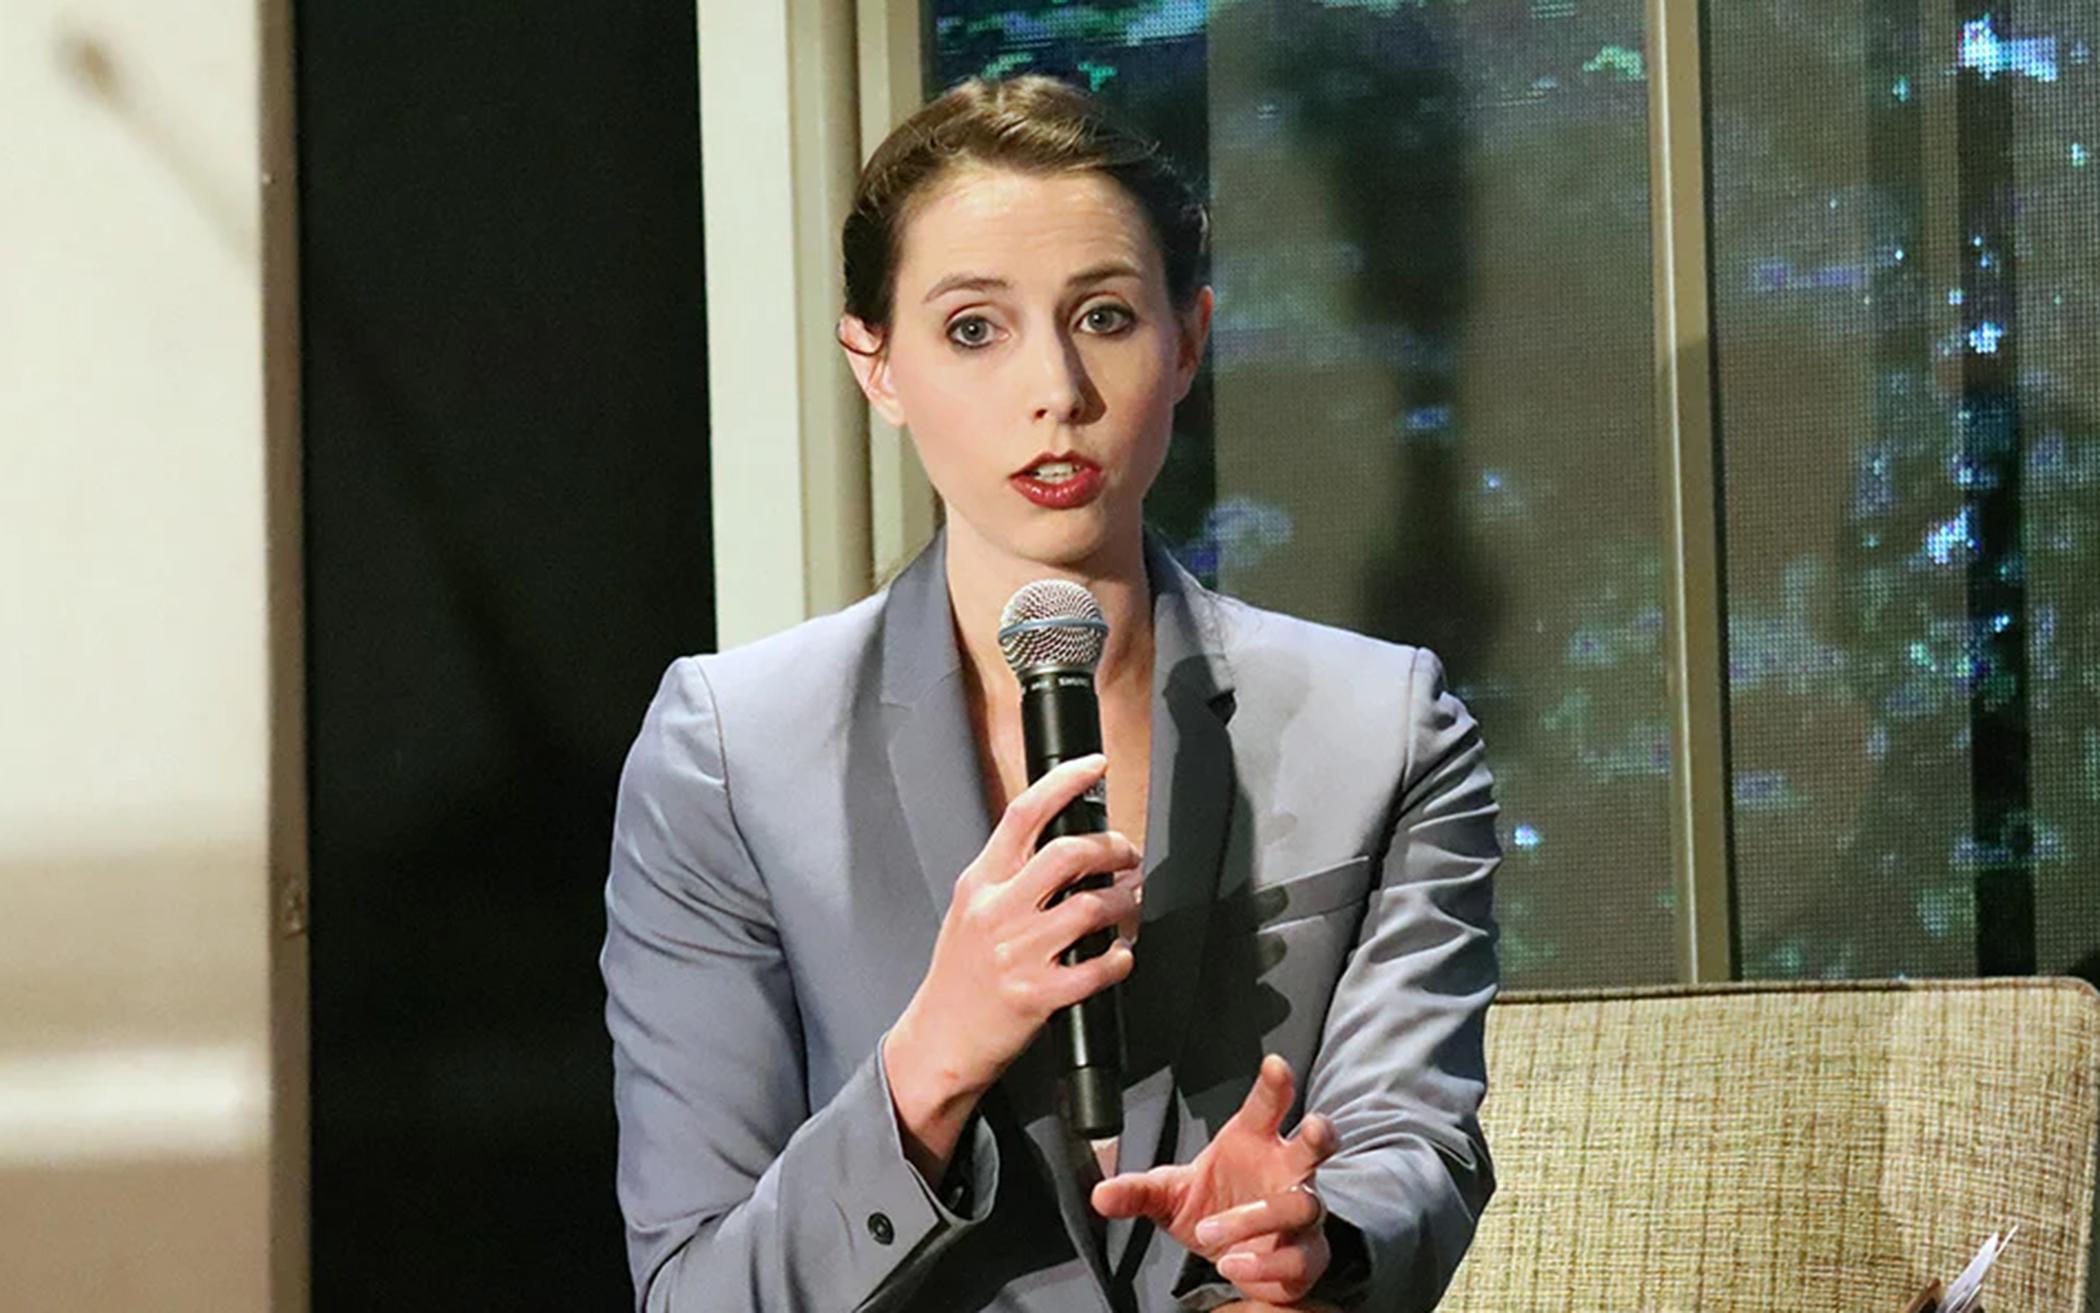 Rachael Denhollander speaks during the Presidents Conference of the Council for Christian Colleges and Universities on Friday, Jan. 31, 2020, in Washington.